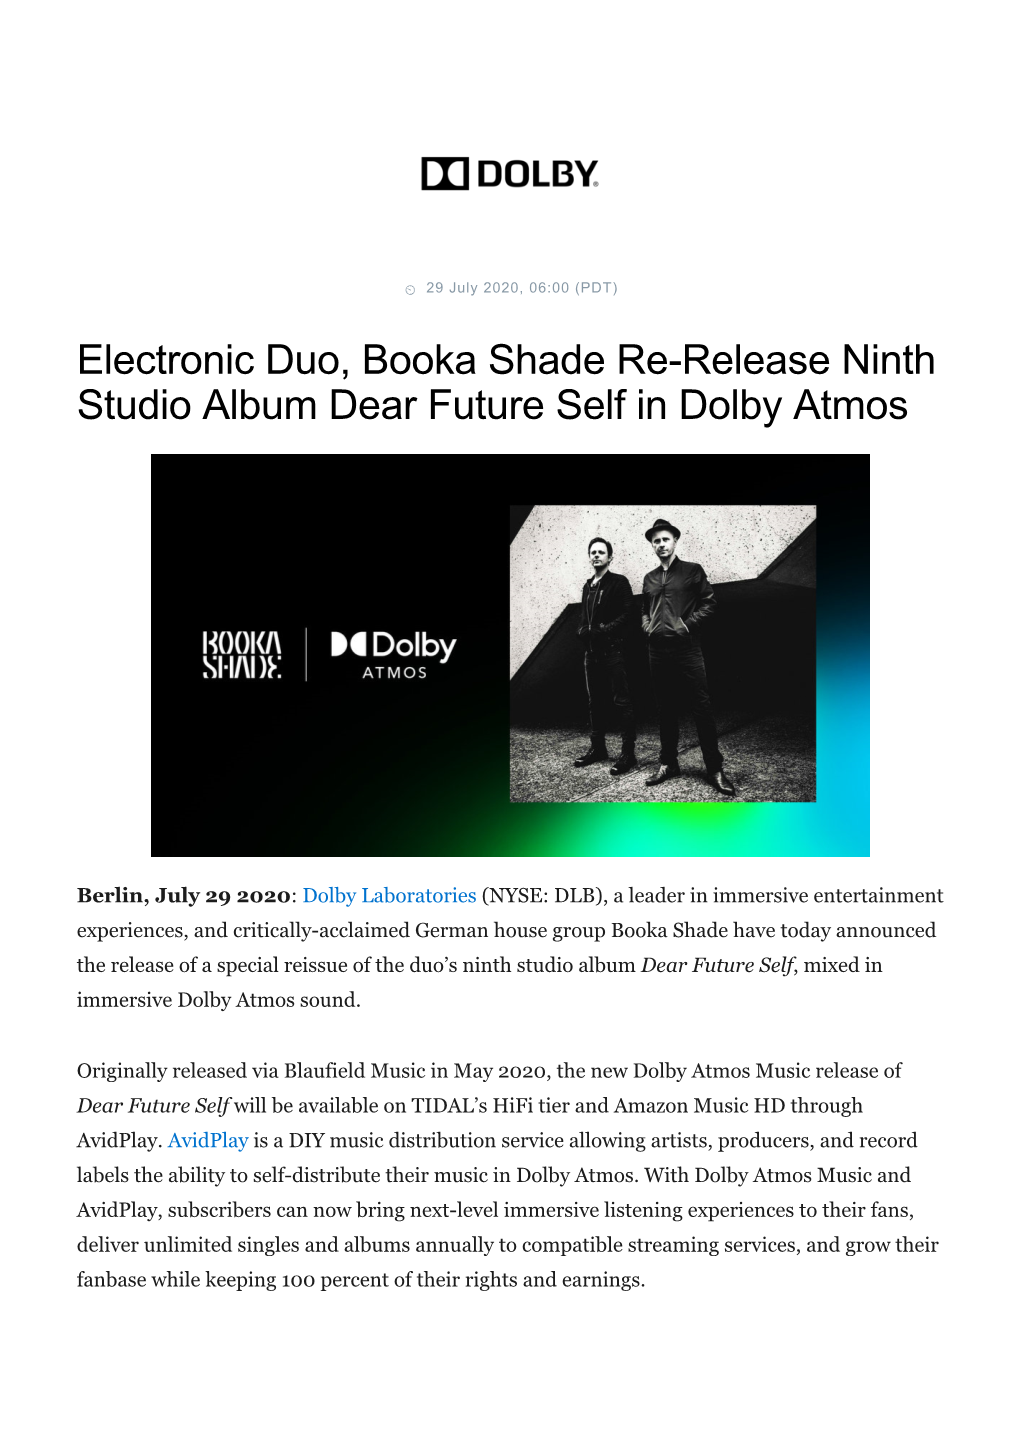 Electronic Duo, Booka Shade Re-Release Ninth Studio Album Dear Future Self in Dolby Atmos